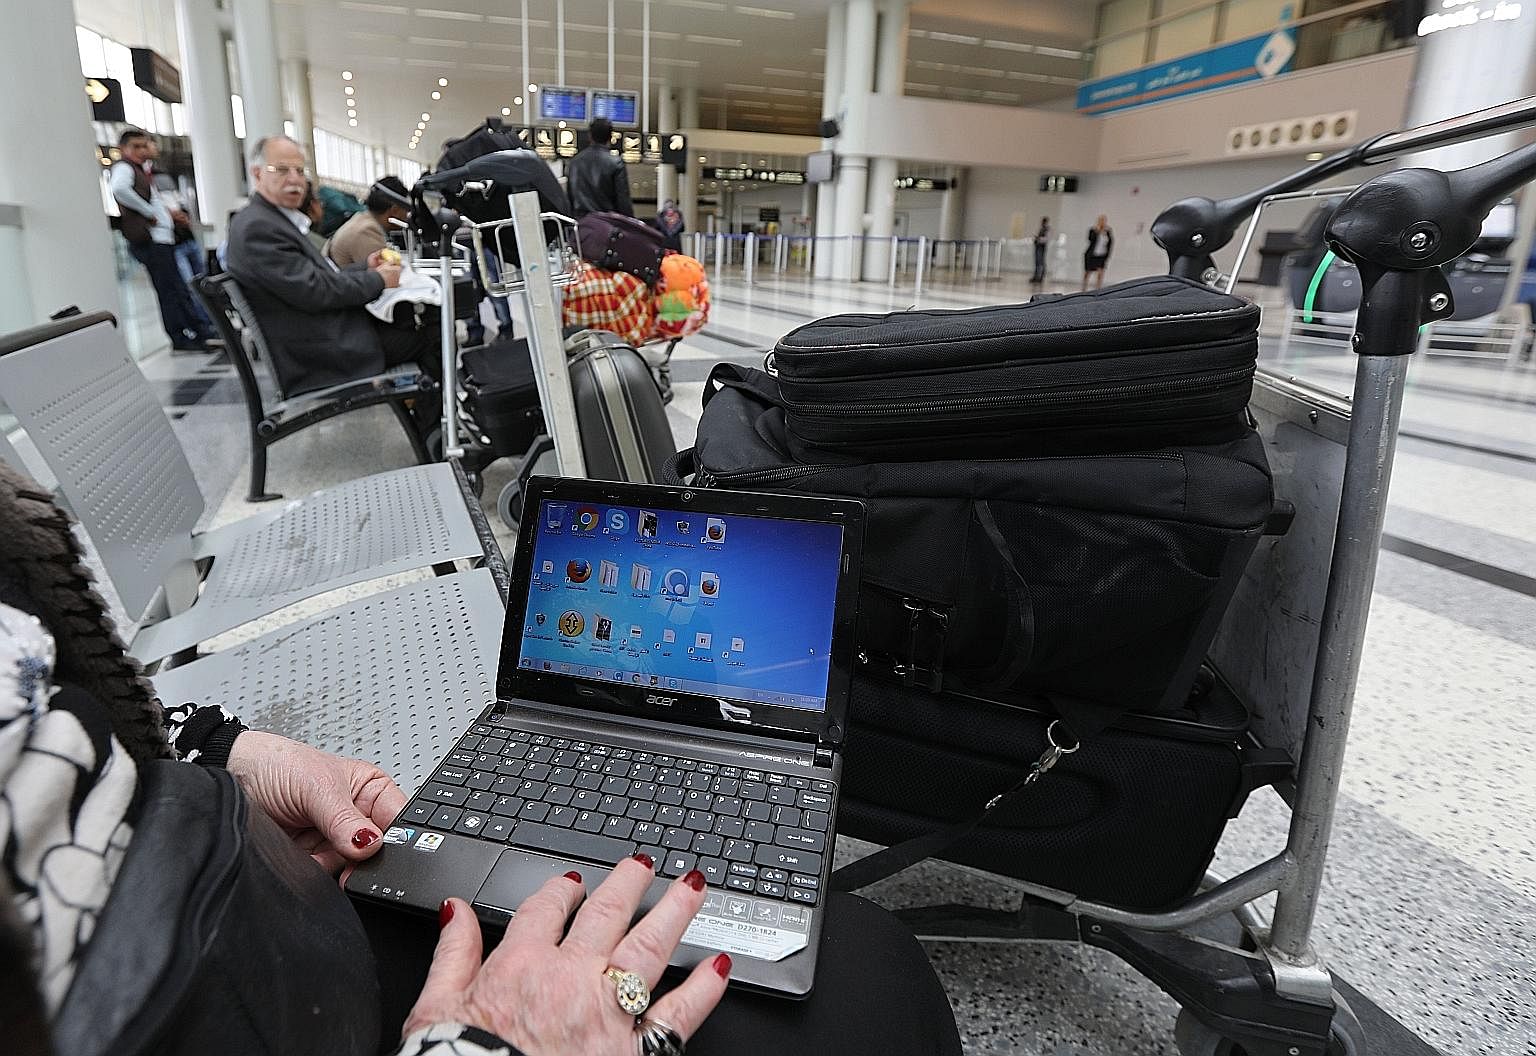 Last week, the US and Britain said they will stop travellers from taking into aircraft cabins large electronic devices such as bigger cameras, tablets and laptops, if they board from some countries in the Middle East and North Africa.